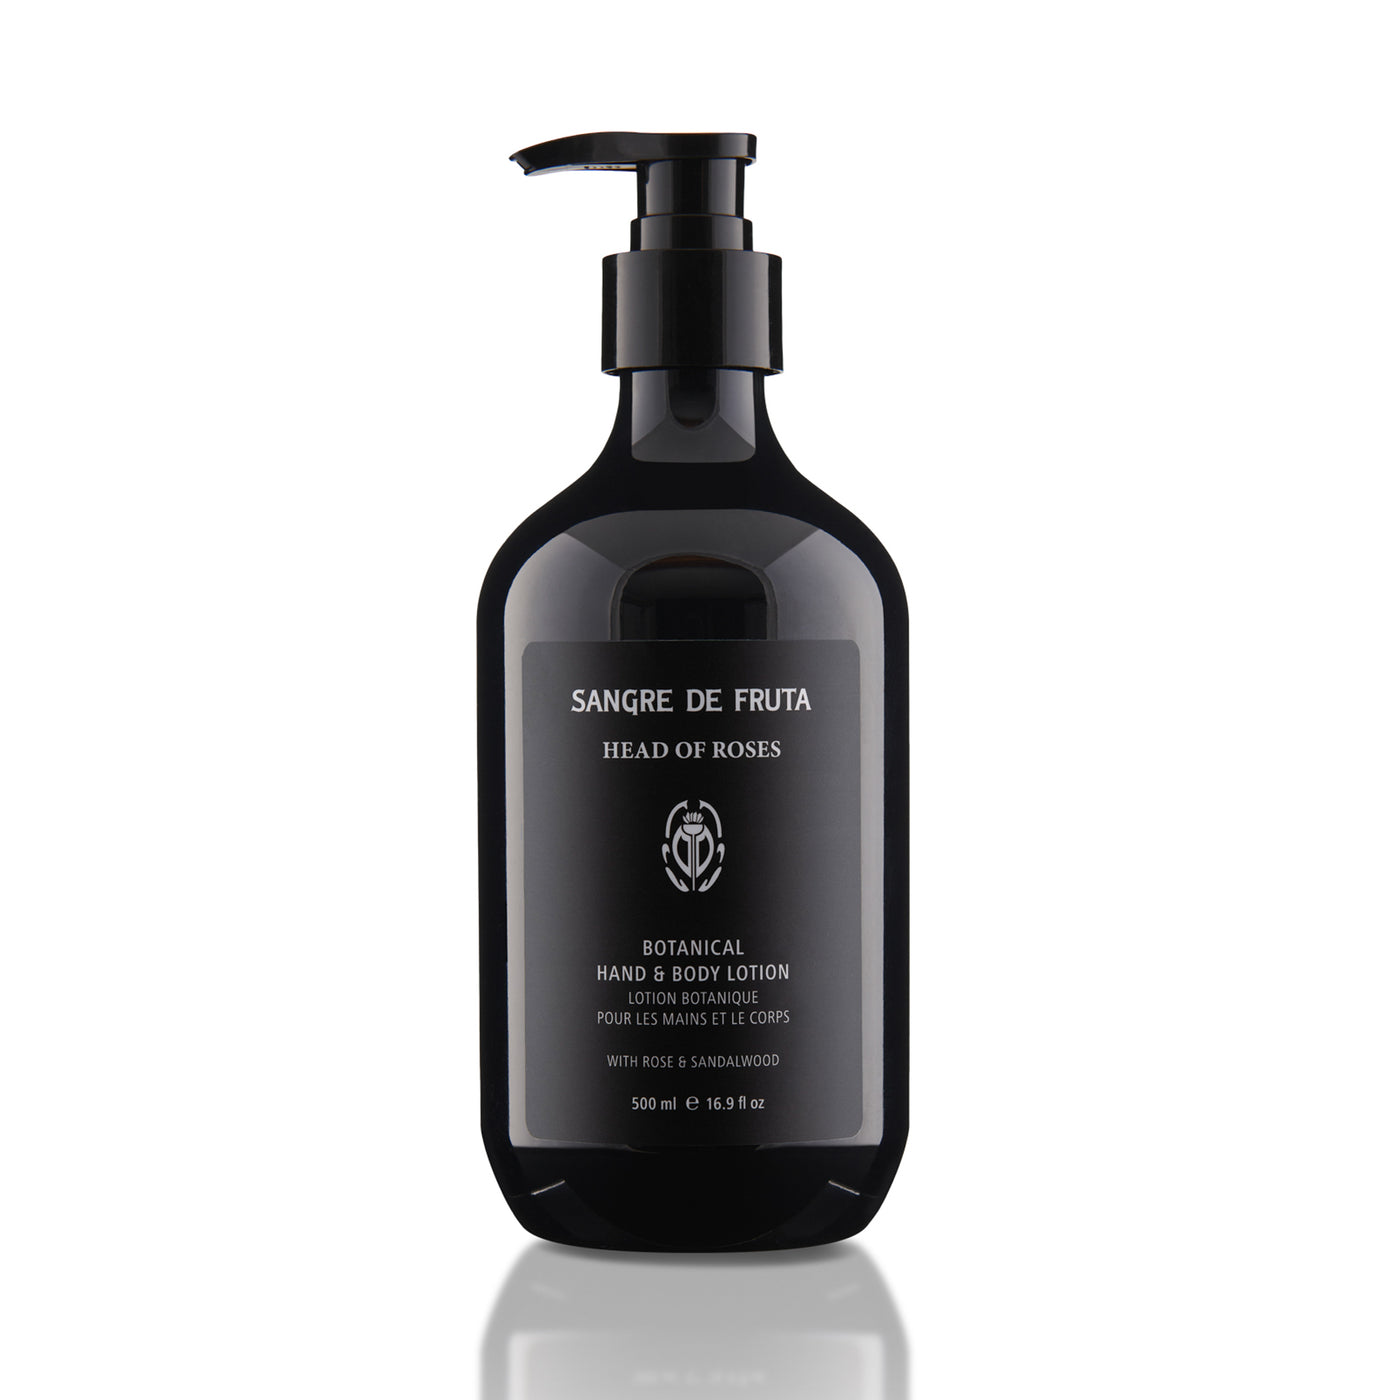 BOTANICAL HAND & BODY LOTION - Head of Roses